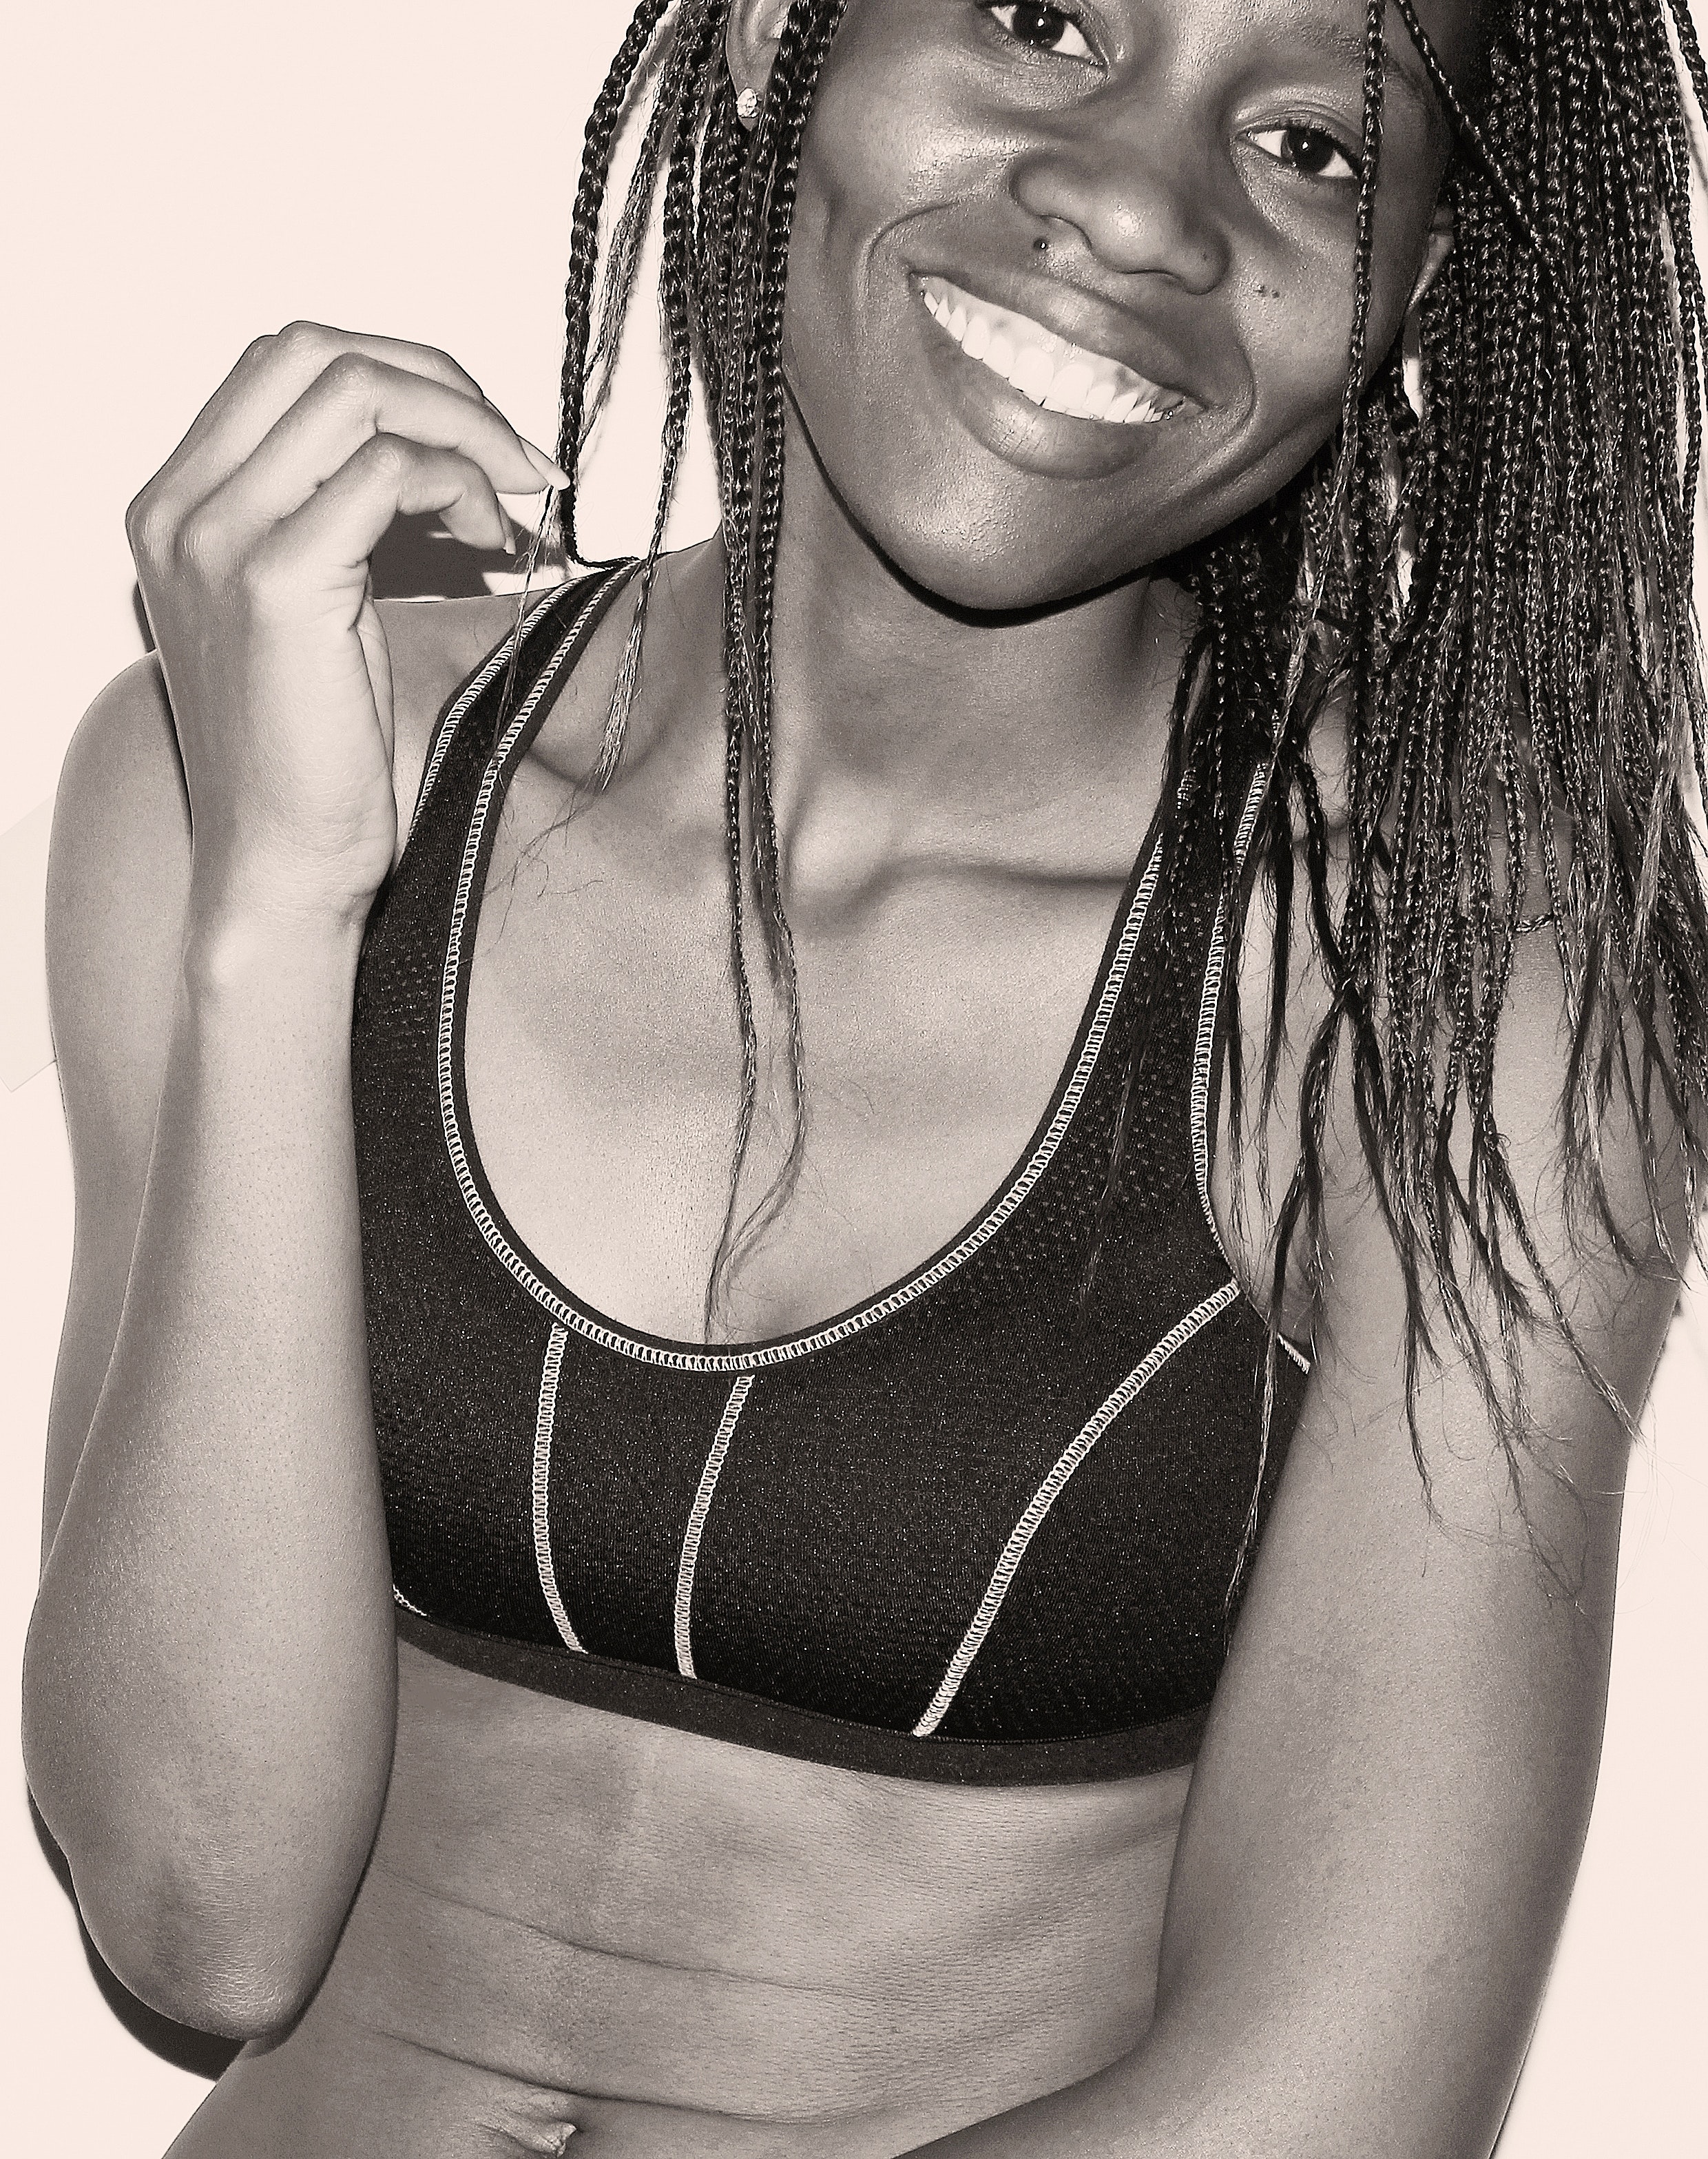 Woman in Sport Bra With Braided Hair Grayscale Photo, Abstract, Model, Woman, Studio, HQ Photo